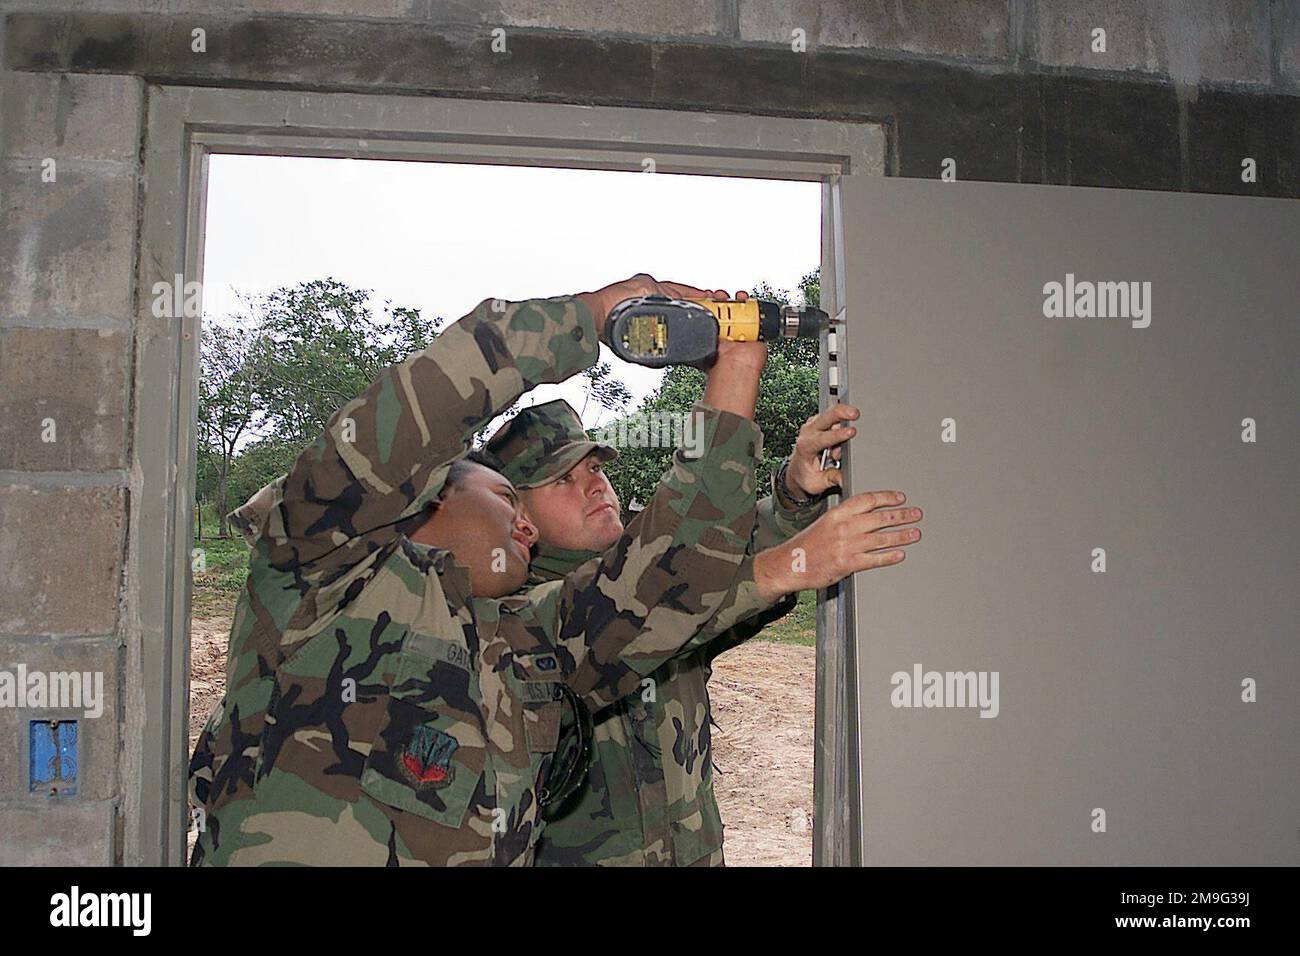 US Air Force Lance Corporal Timothy Merren holds the door while US Air Force AIRMAN First Class Albert Gates secures its hinges for the new school at Las Palmas Paraguay, during Exercise NEW HORIZONS. Combined Task Force Guarani Springs conducts engineering and medical operations in Paraguay, enabling joint training. The task force will renovate, construct and improve the infrastructure of four schools, four water wells, two medical clinics, and conduct mutable Medical Readiness Training Exercises (MEDRETES), and Veterinarian Readiness Training Exercises (VETRETES) as agreed to by the governme Stock Photo